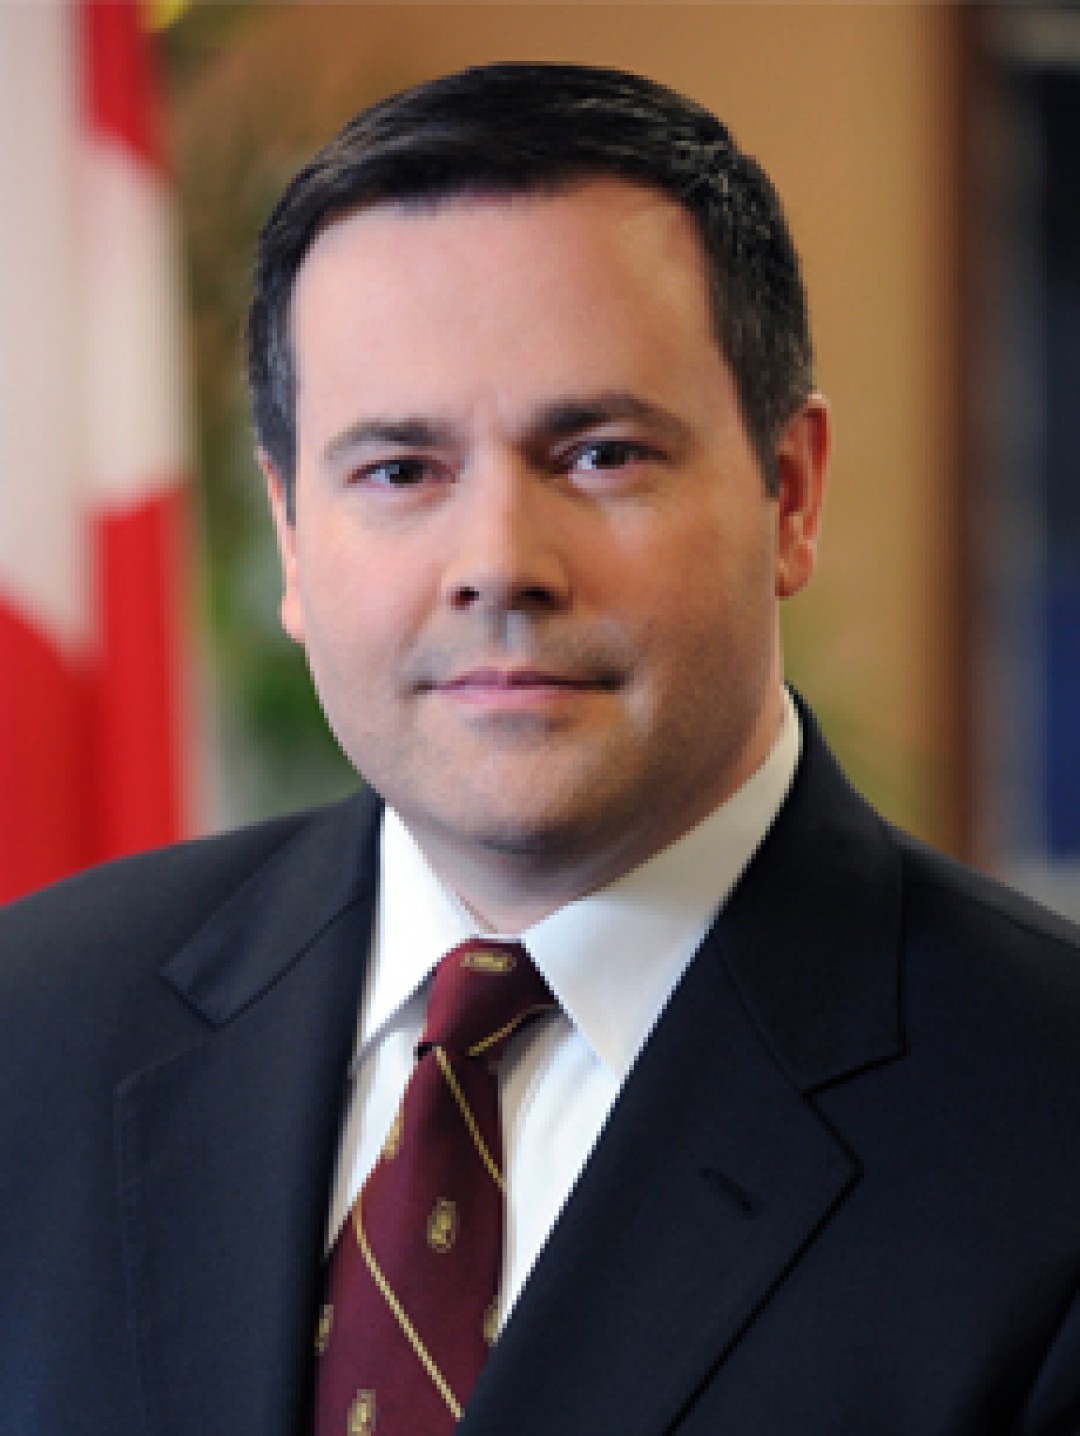 Federal Minister of Employment Jason Kenney to speak at Employer of Distinction Awards Feb 14th